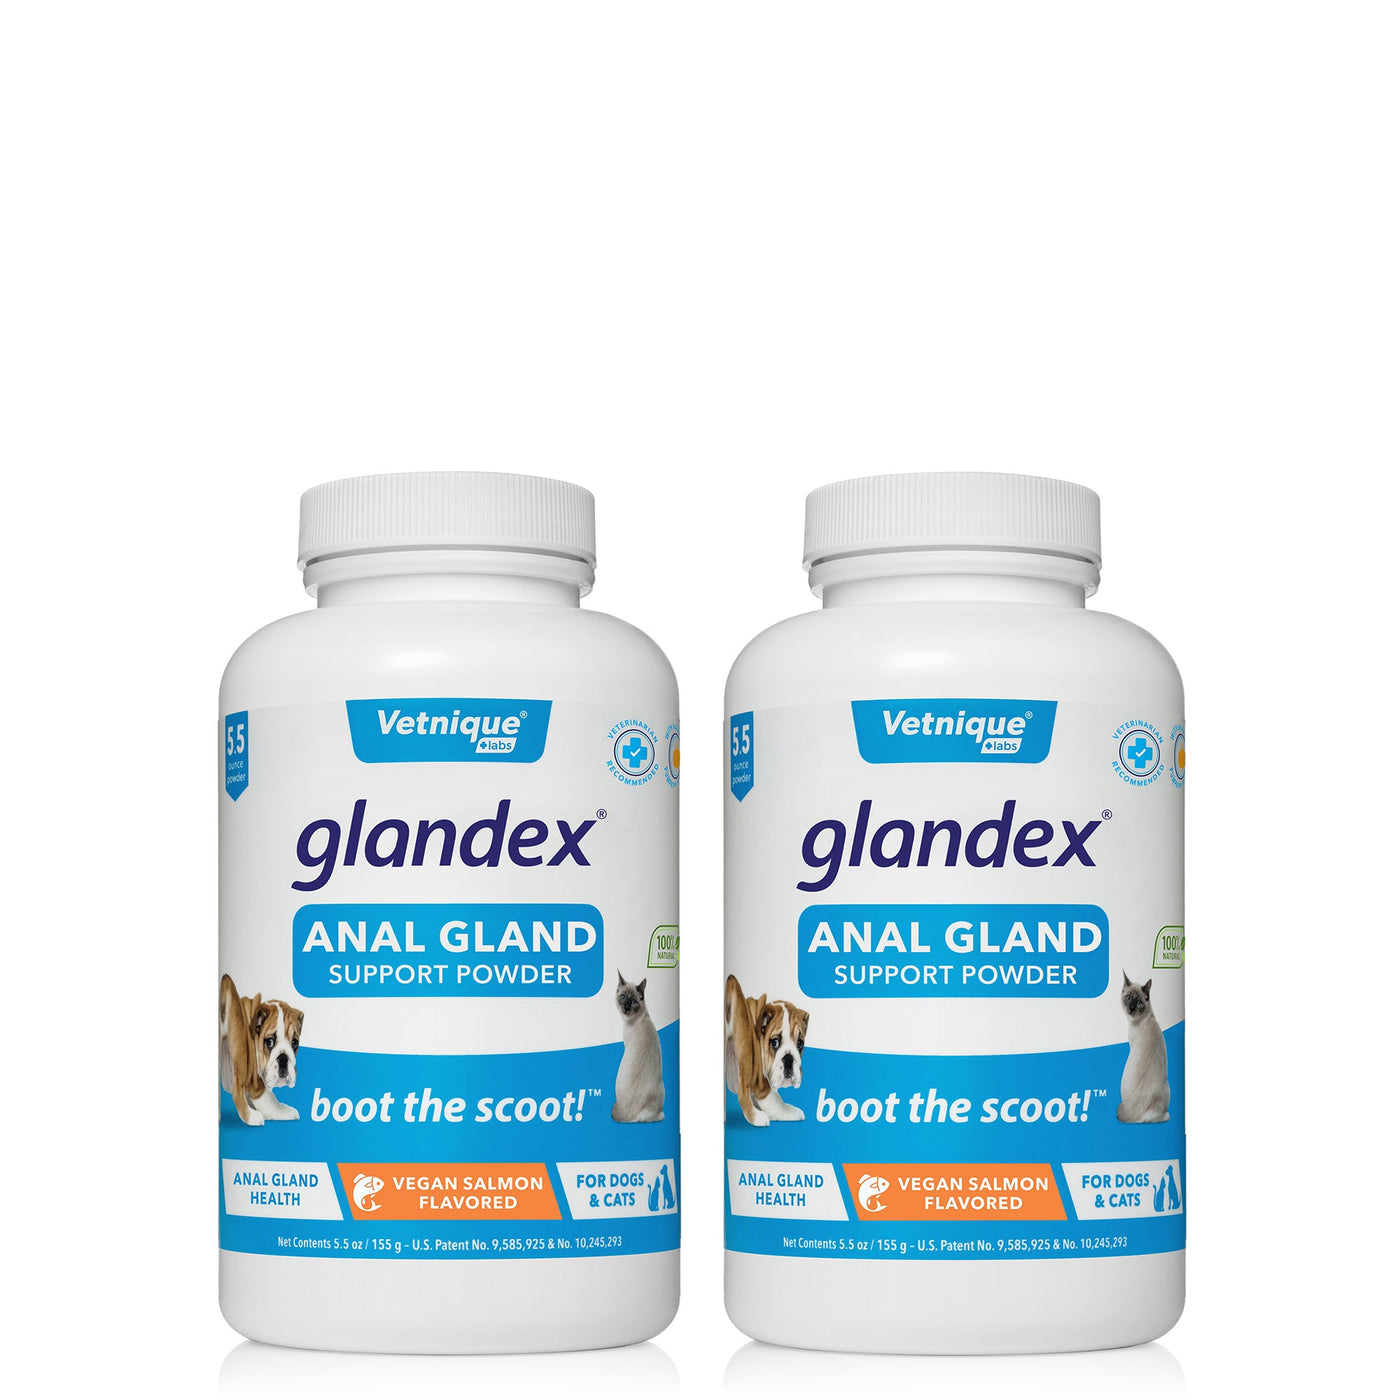 Glandex® Anal Gland Supplement for Dogs & Cats with Pumpkin - 5.5 oz Powder -